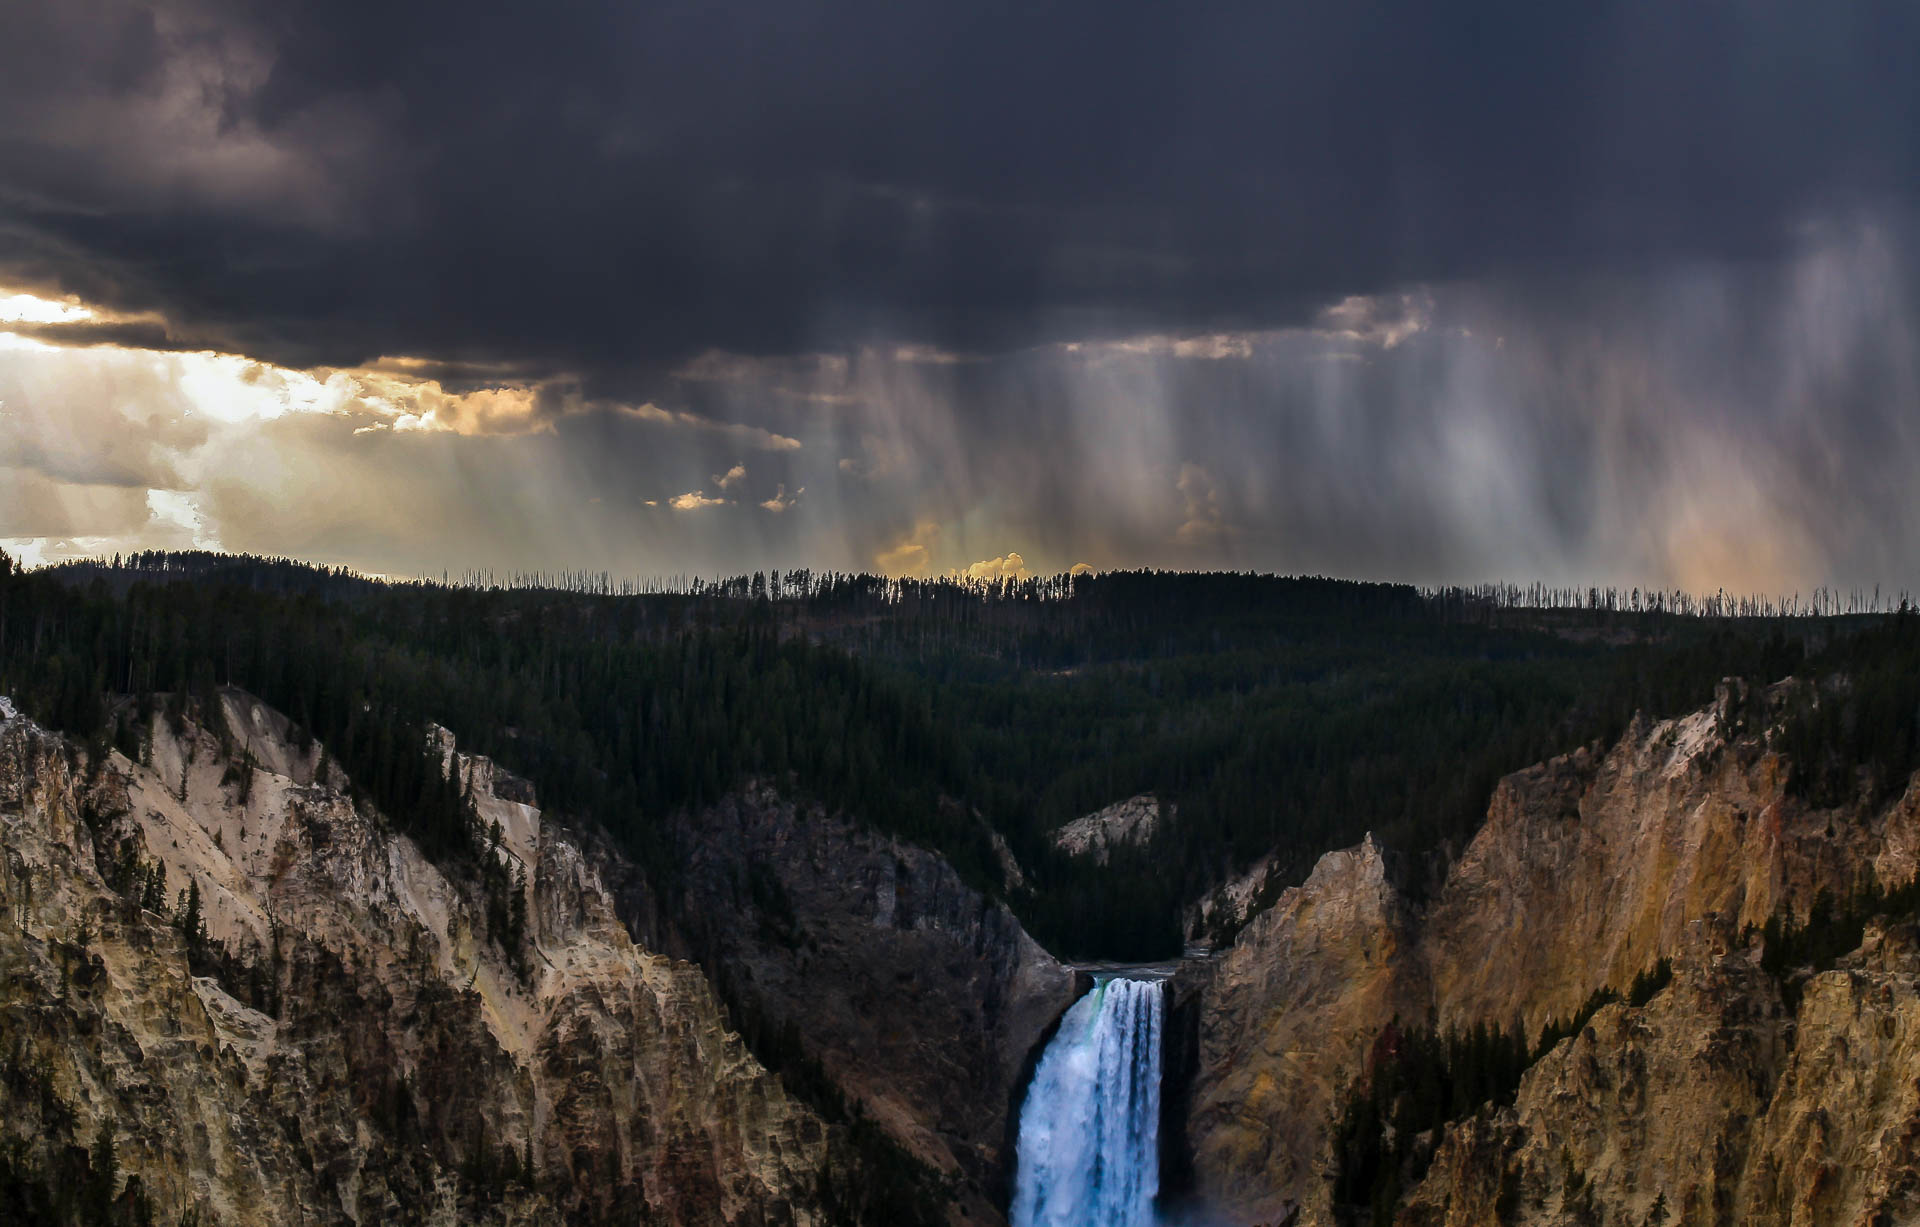 Thunderstorm on the Grand Canyon of the Yellowstone